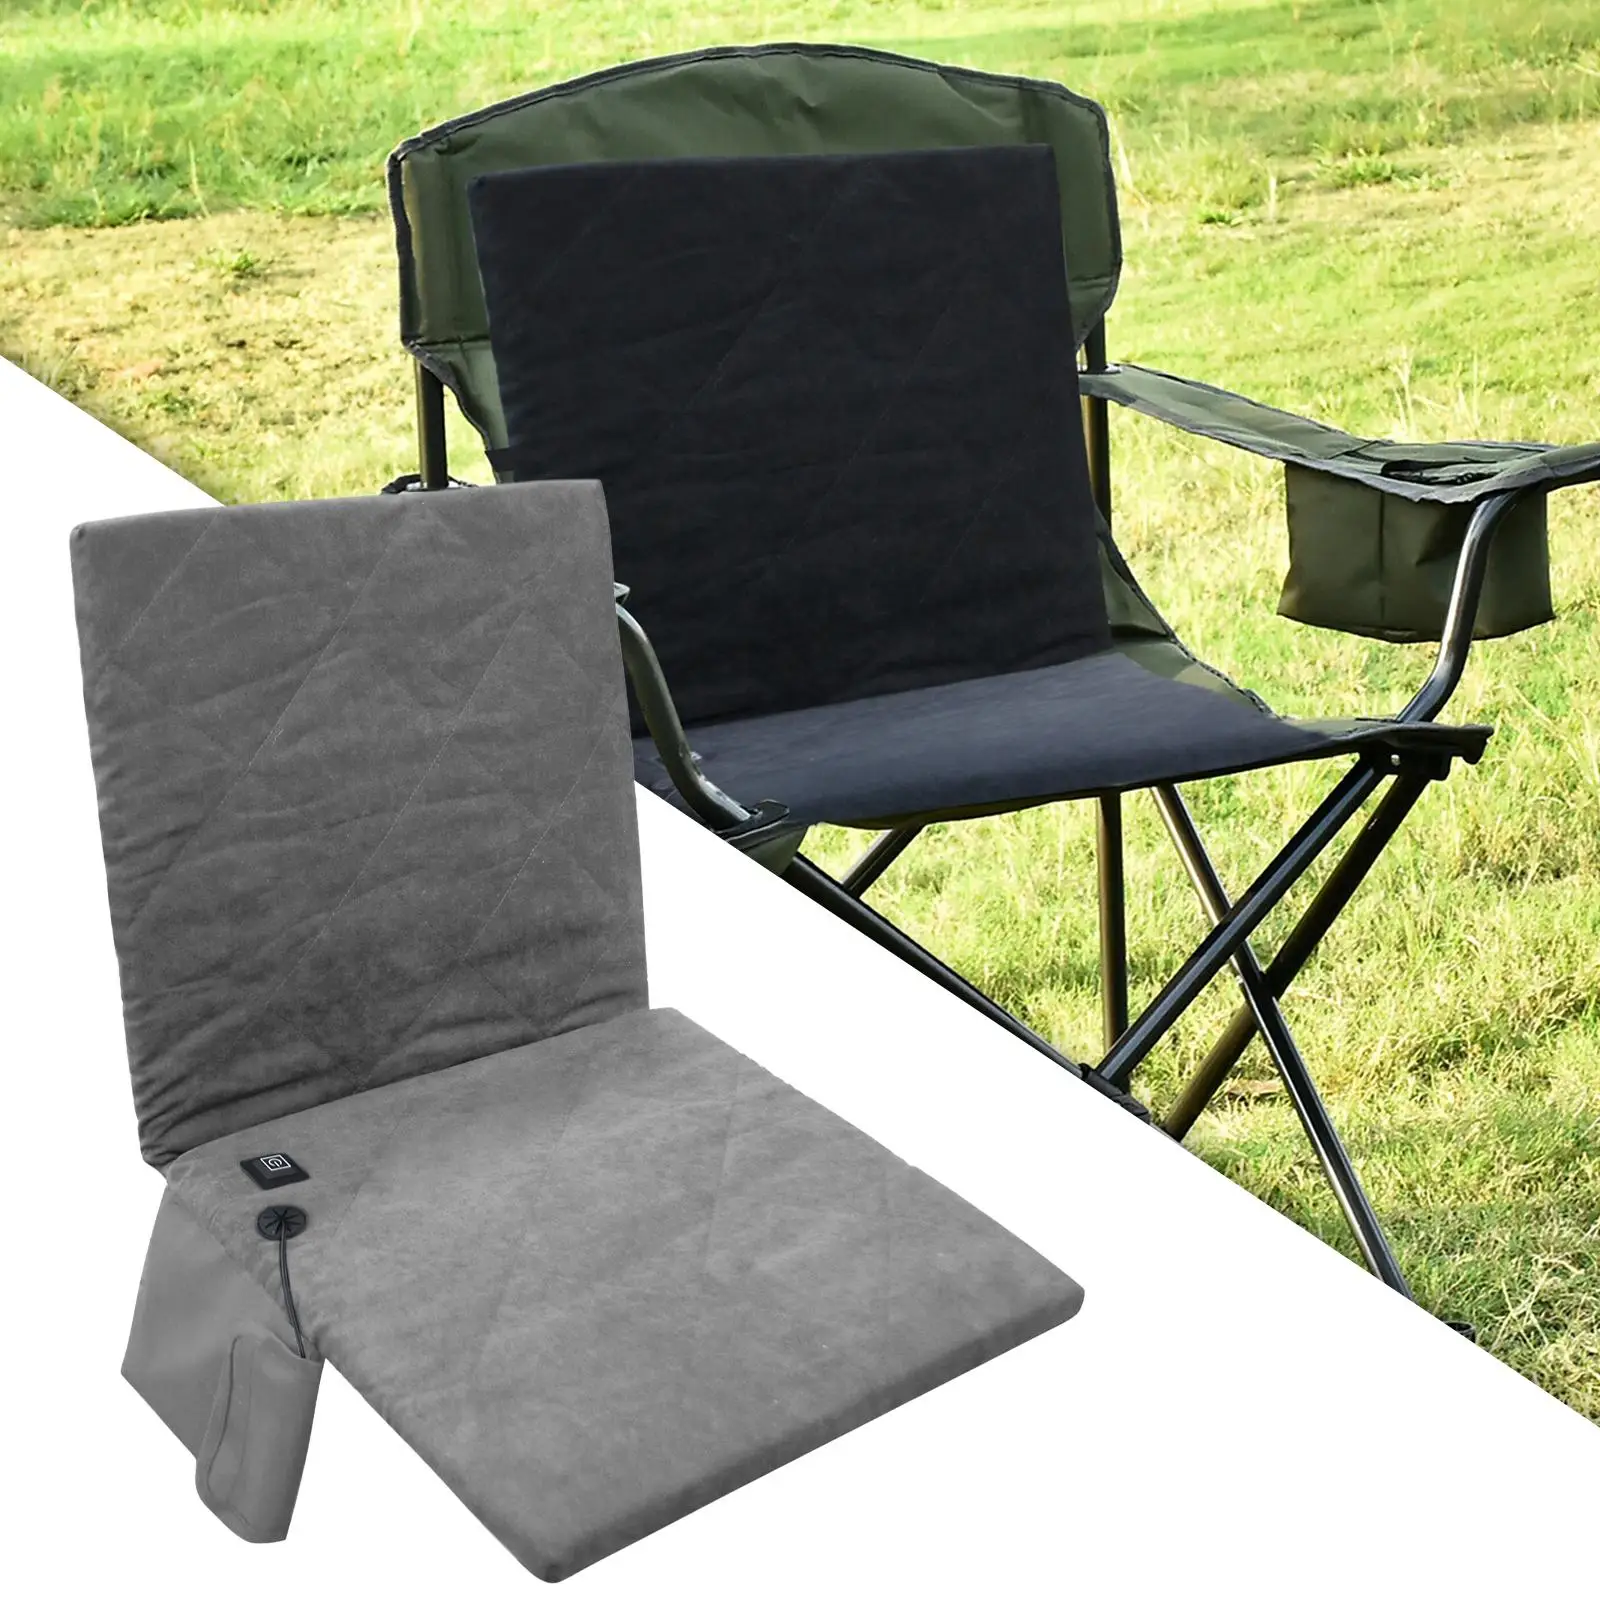 Seat Cushion Heated 3 Heating Levels Comfort Warming Cushion for Home Office Chair Camping Chair Heated Cushion for Lawn Patio